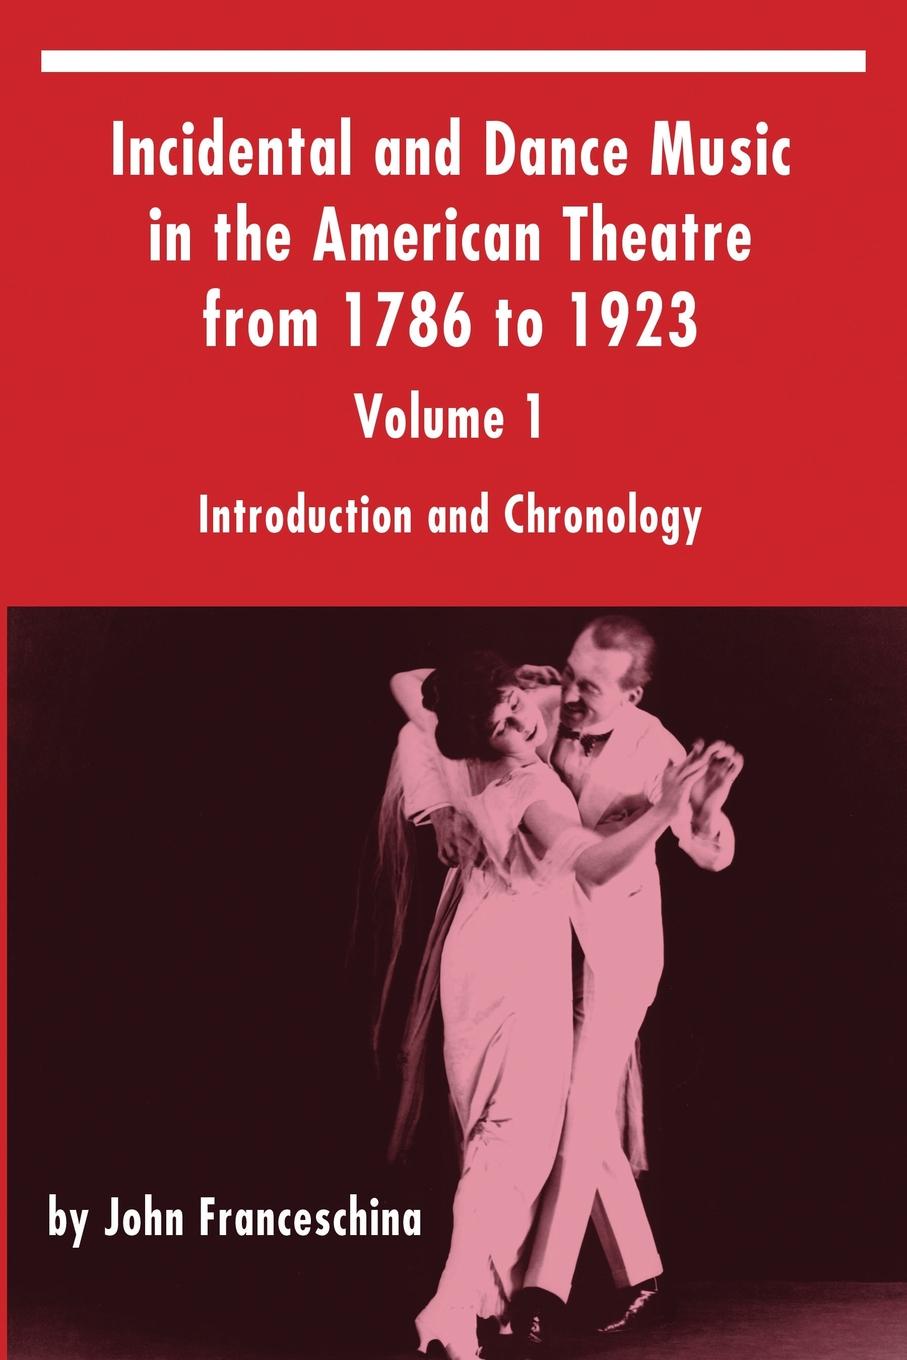 John Franceschina Incidental and Dance Music in the American Theatre from 1786 to 1923. Volume 1, Introduction and Chronology